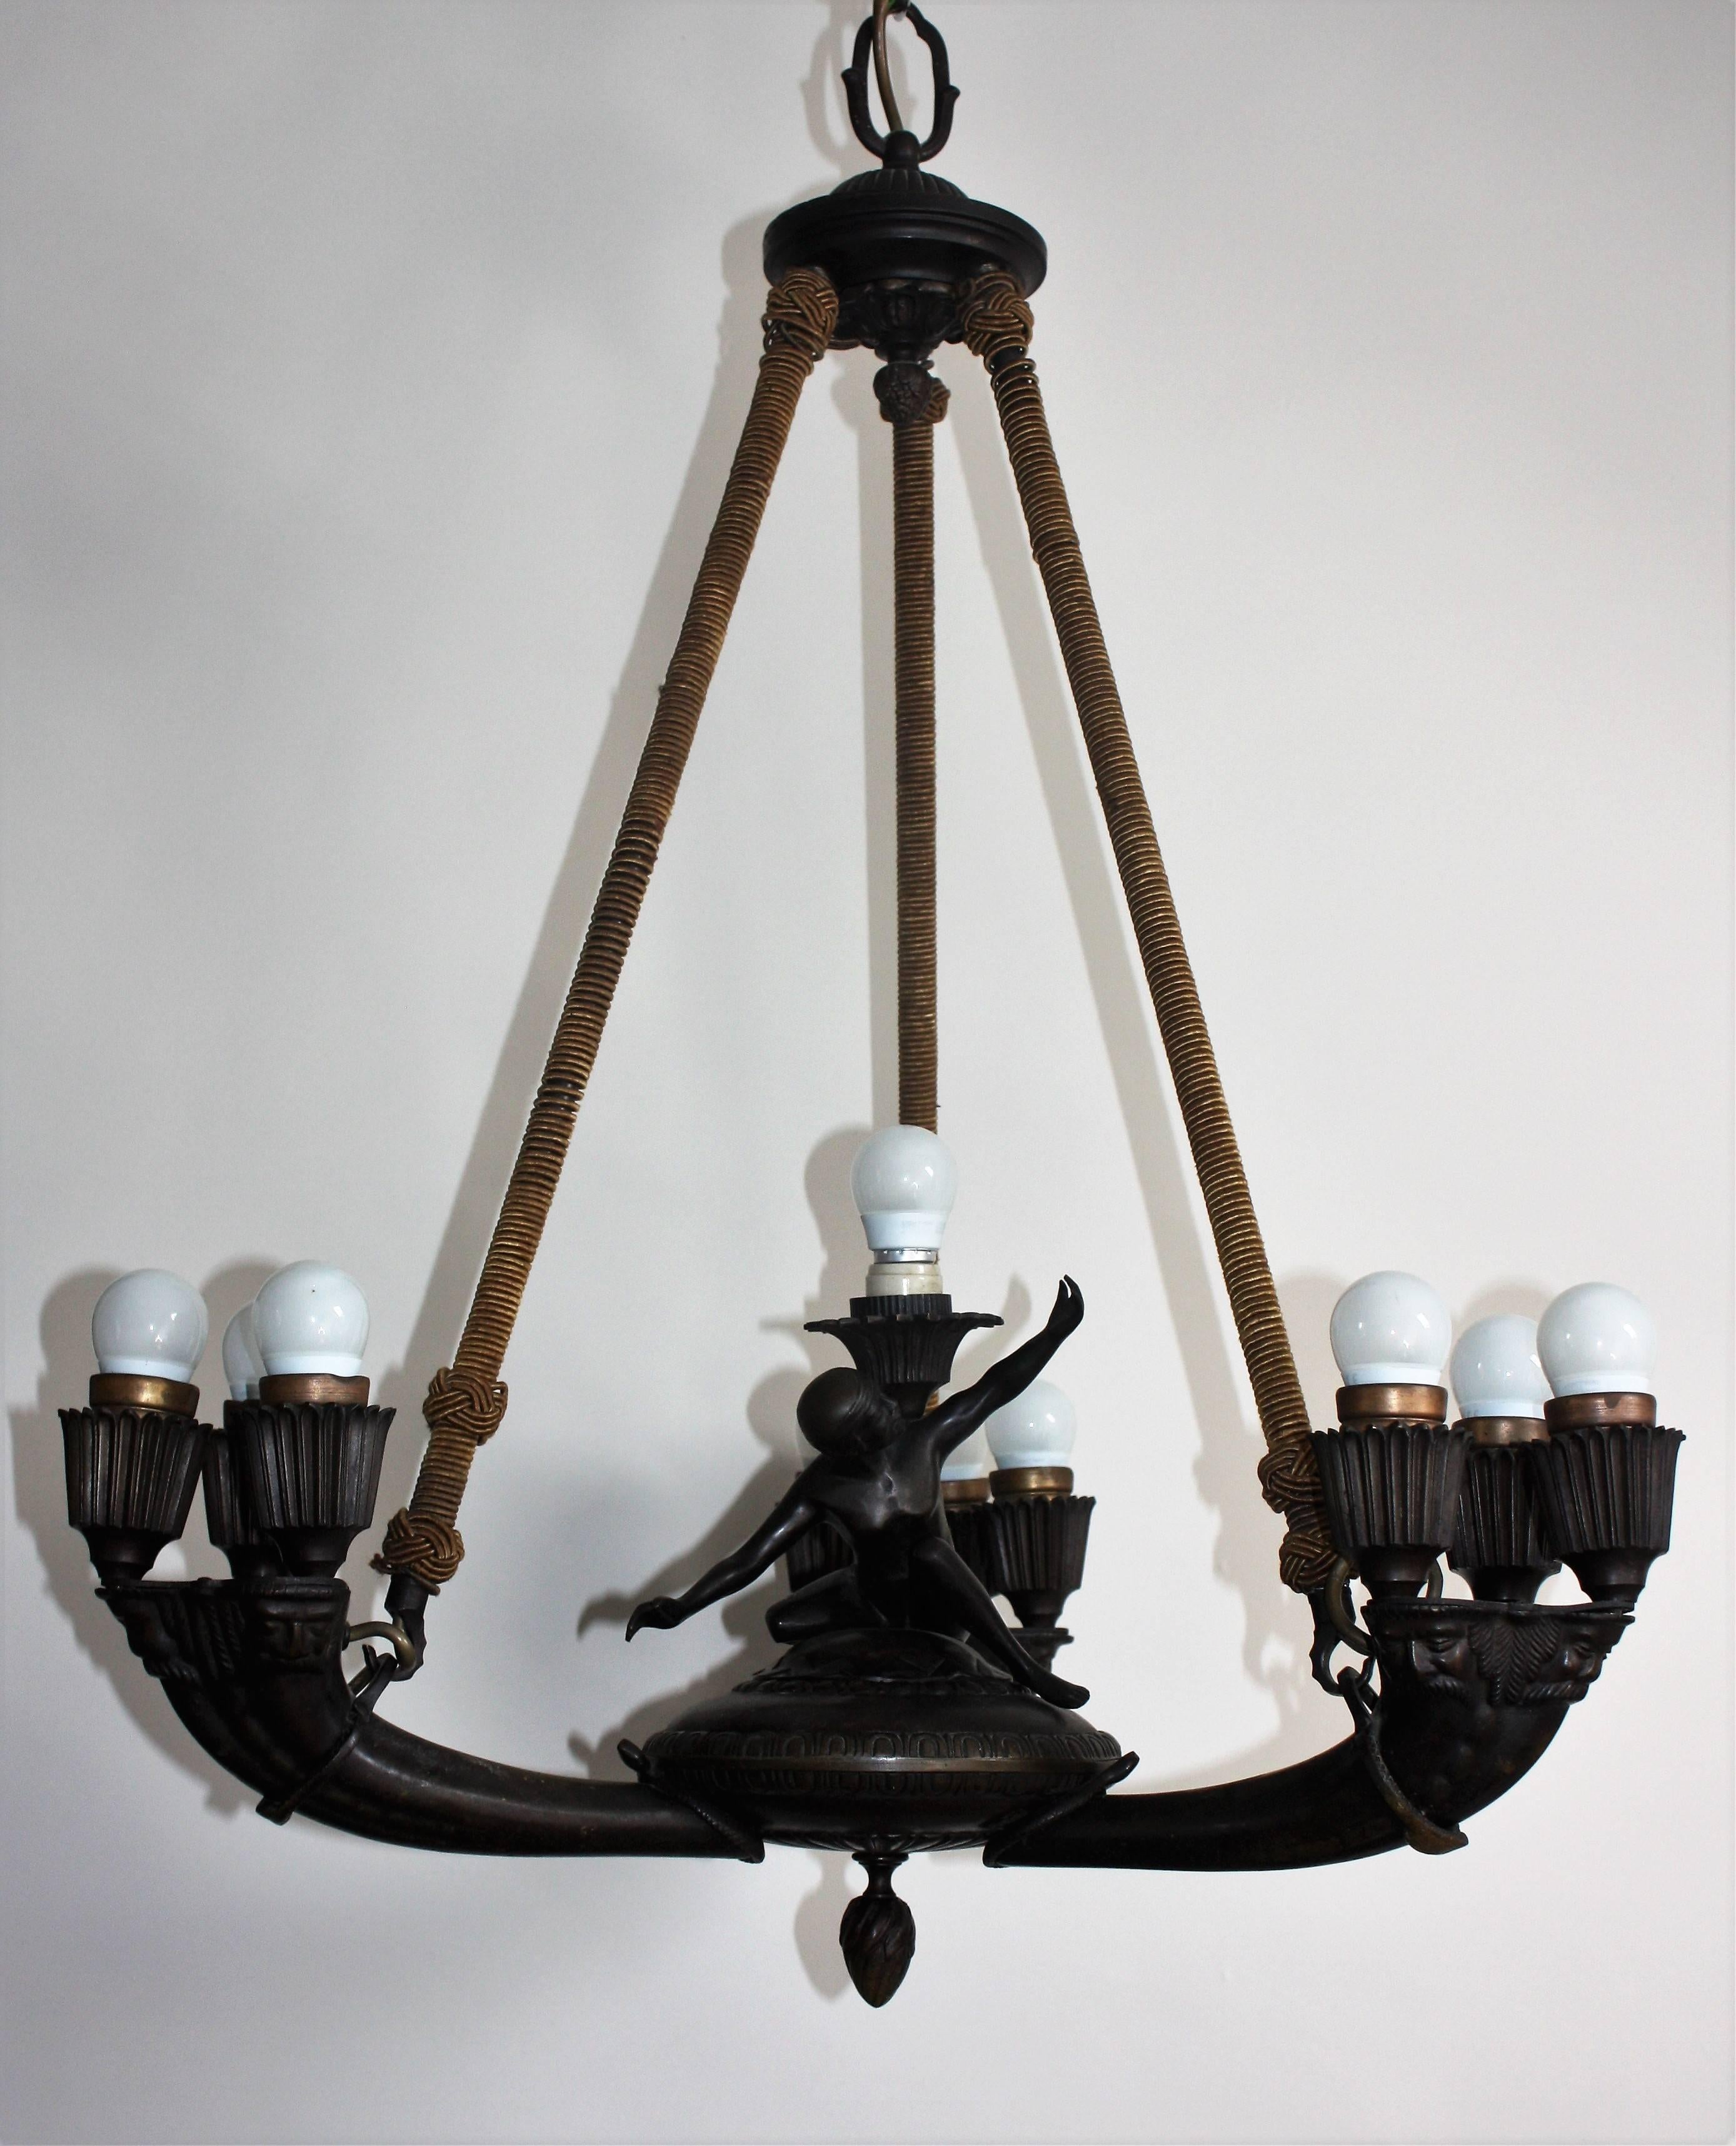 Solid bronze, three-arm chandelier in the style of Empire, Germany, circa 1900s.
Ten-light massive bronze frame with beautiful figural details.
New rewired.
Lamp Socket: Ten x E27 Edison for standard screw bulbs.
Very good condition.
 